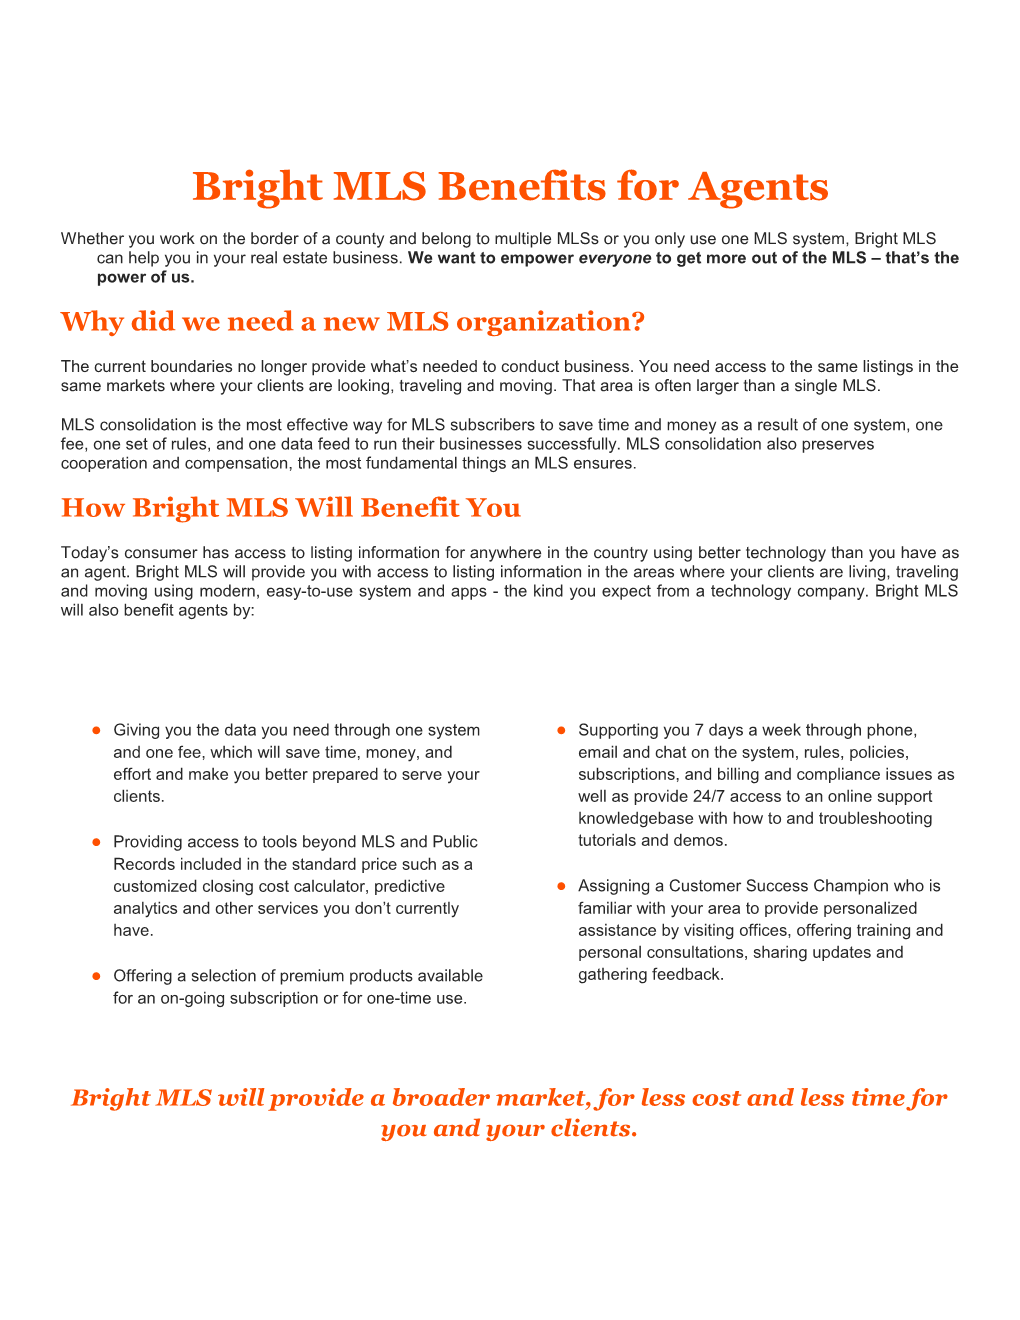 Bright MLS Benefits for Agents